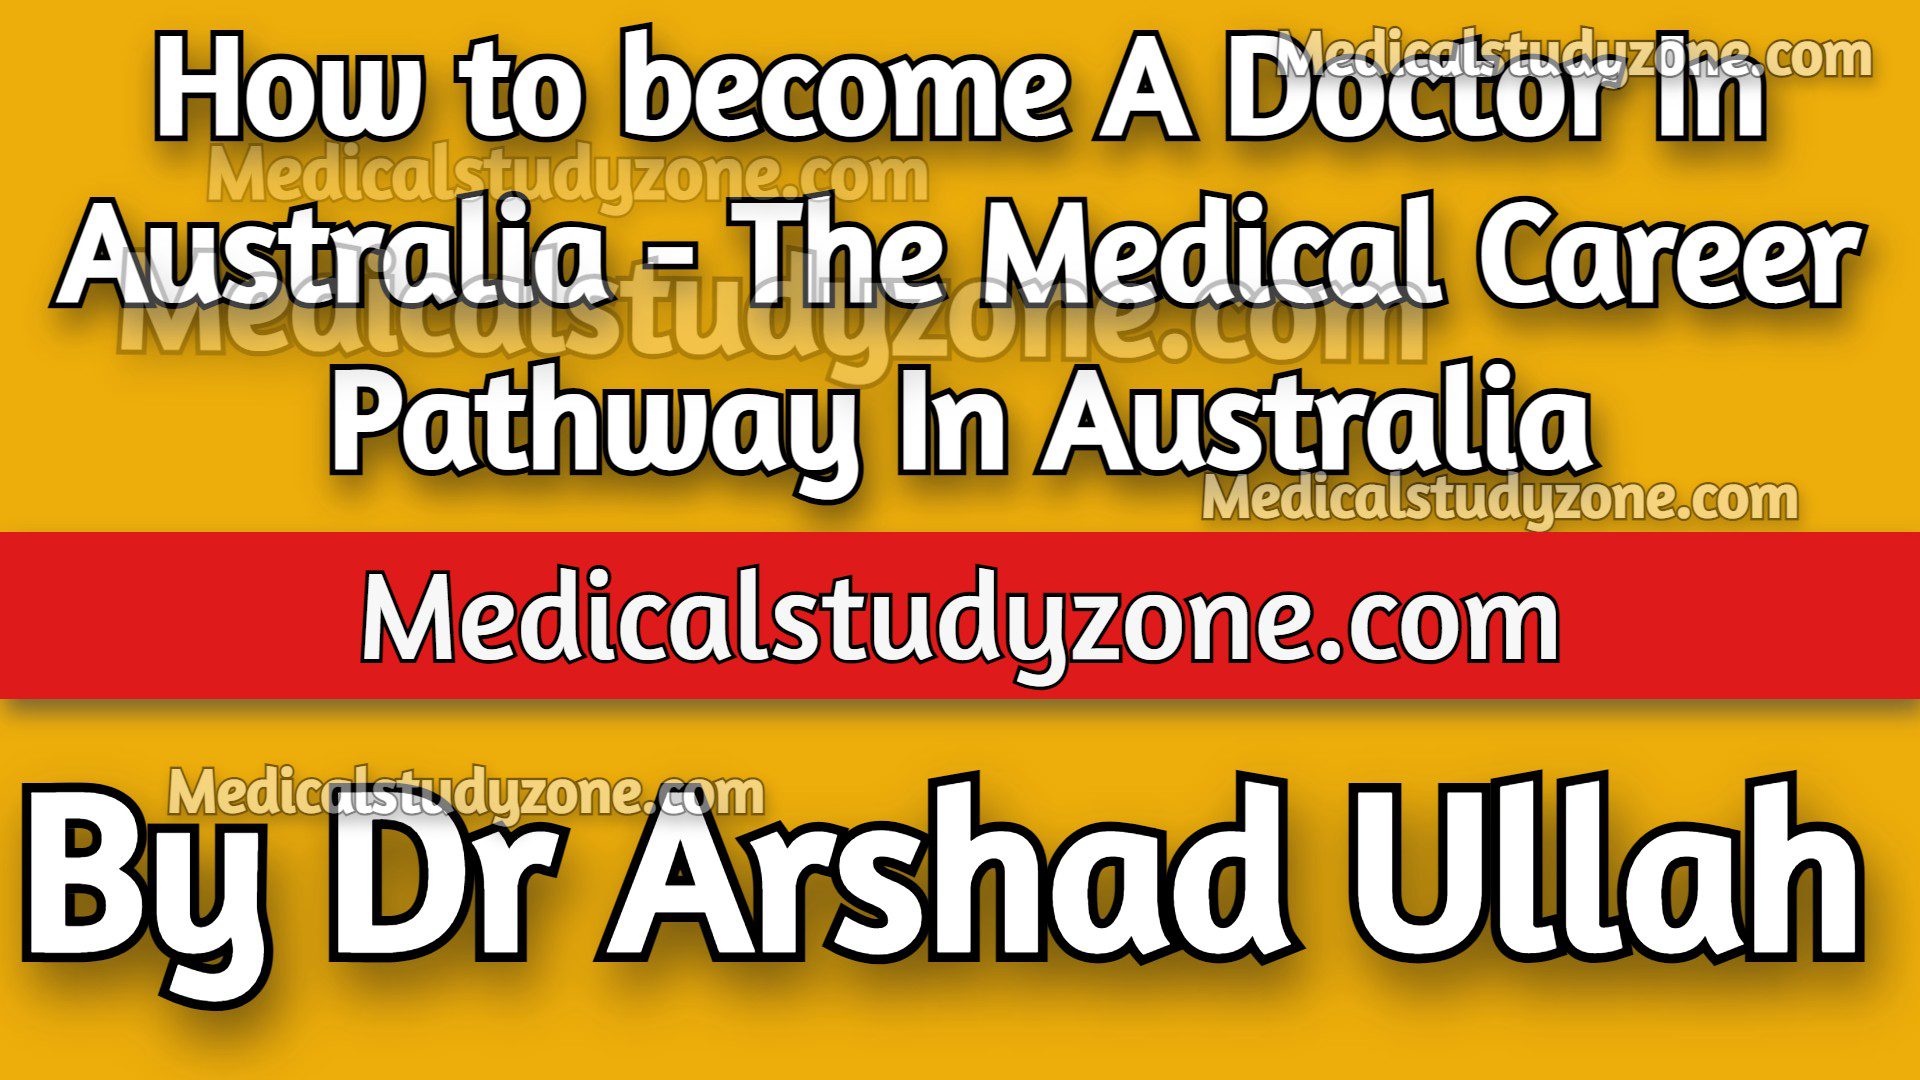 How to become A Doctor In Australia 2022 - The Medical Career Pathway In Australia